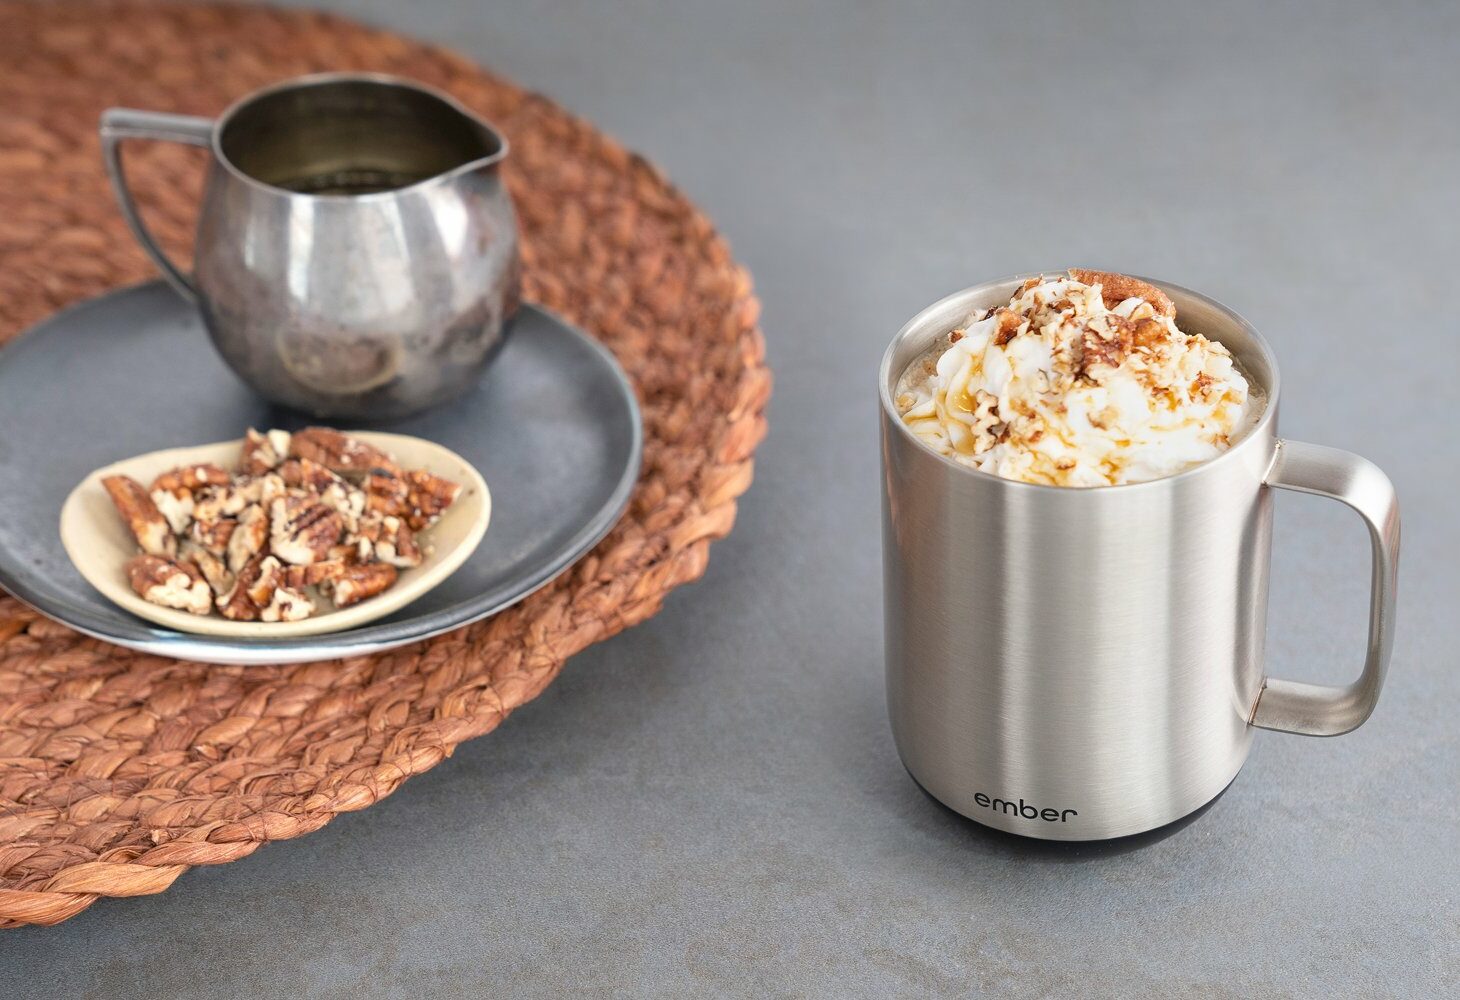 Ember self-heating mug gift for coffee lovers | Juniperus inclusive, sustainable gift guide 2021